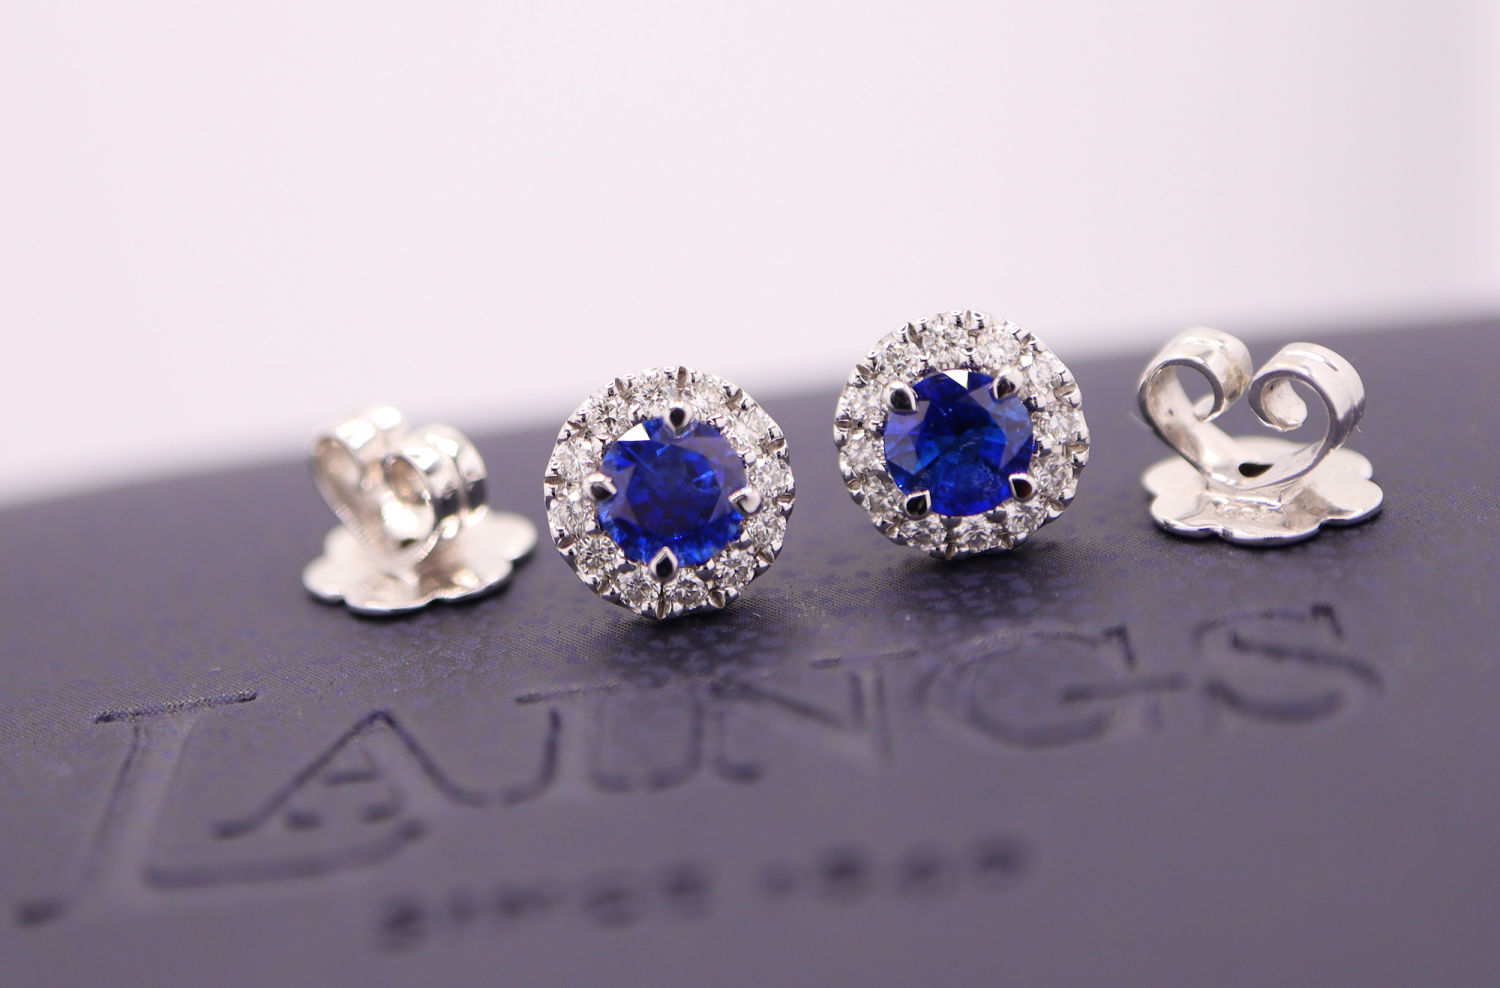 18K WHITE GOLD - 1.01CT SAPPHIRE & DIAMOND STUD EARRINGS; with LAINGS Original Receipt / Certificate - Image 6 of 8